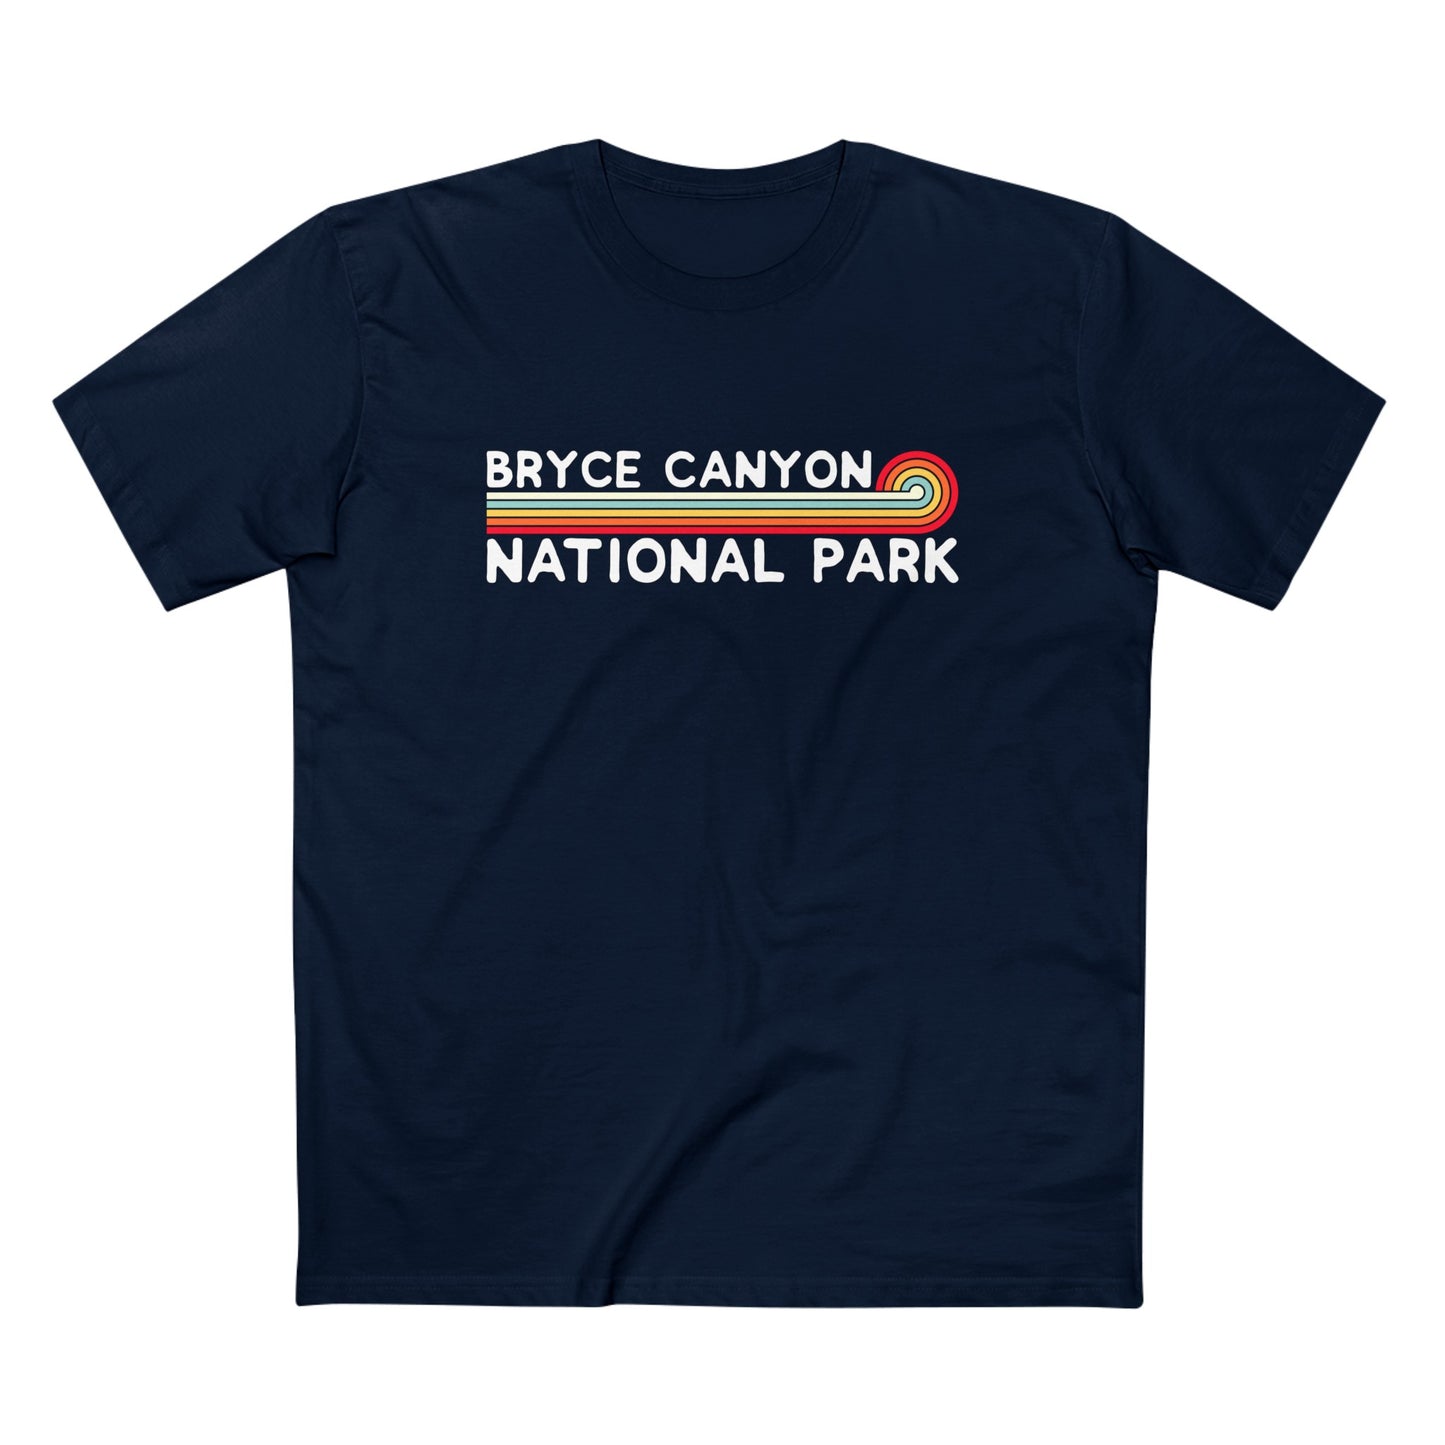 Bryce Canyon National Park T-Shirt - Vintage Stretched Sunrise